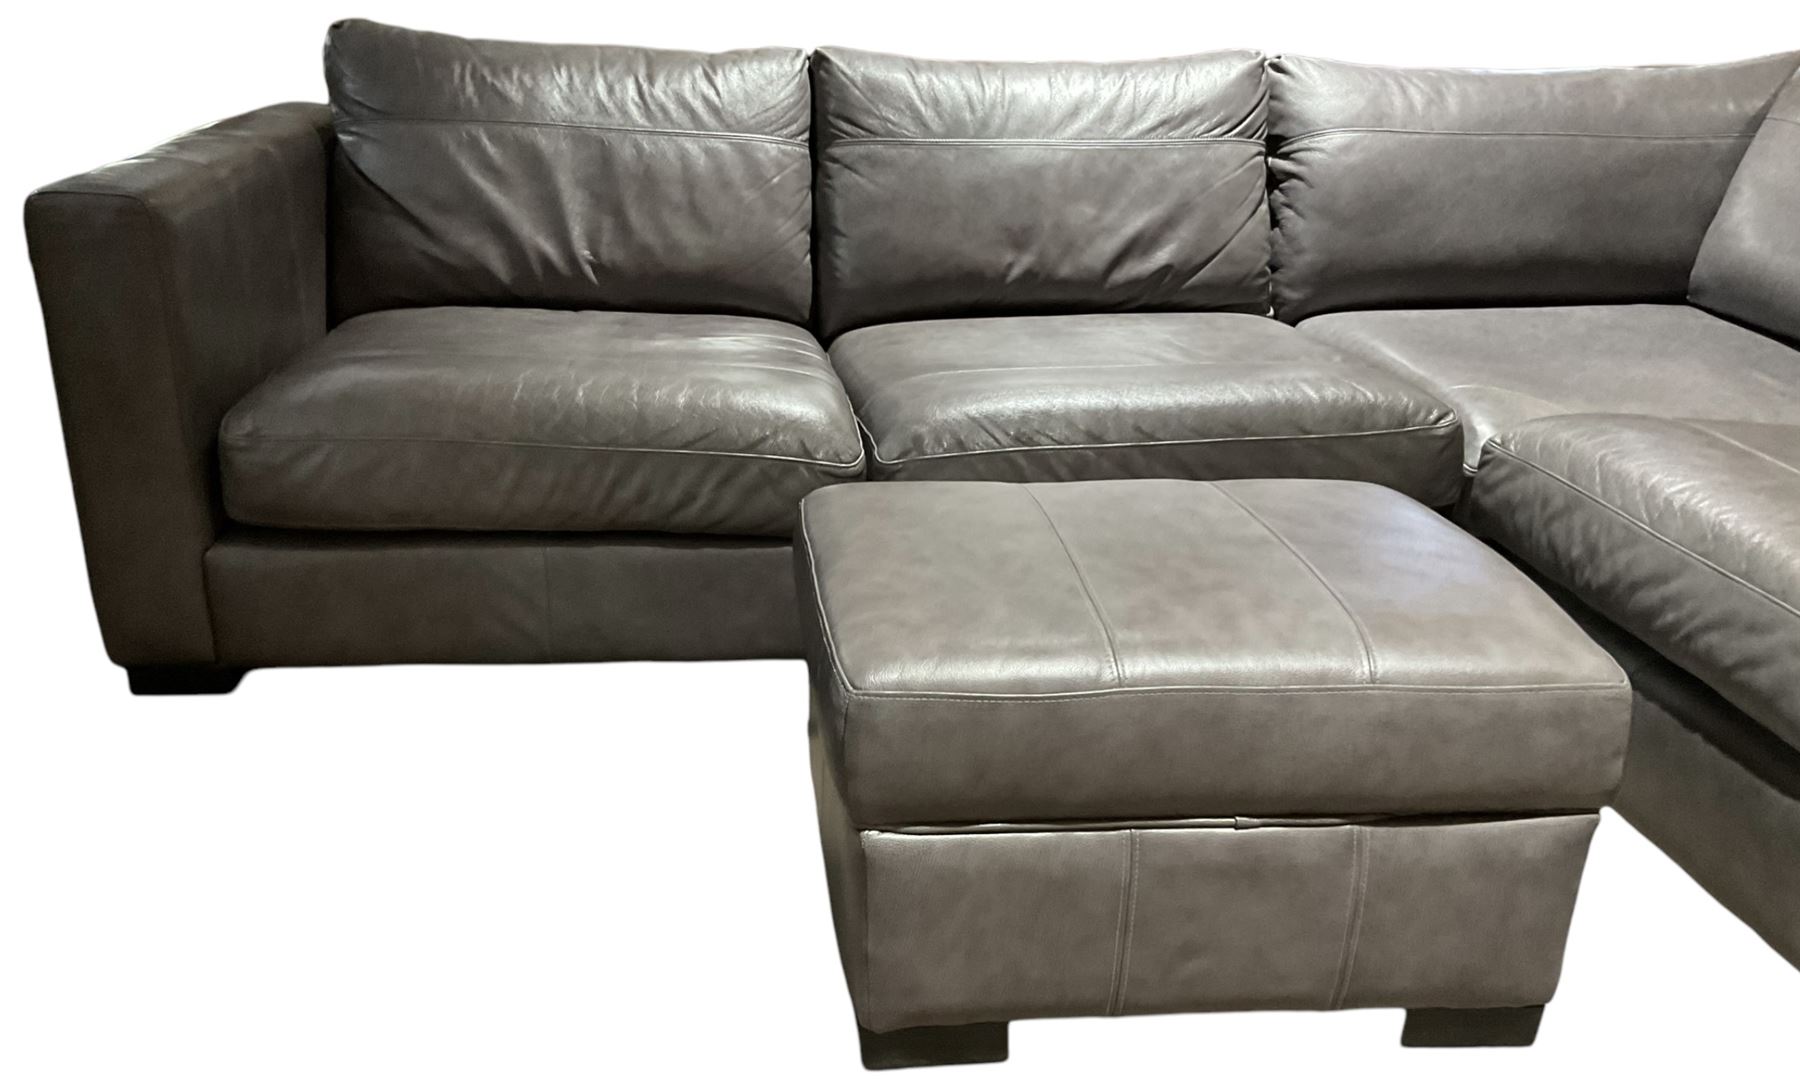 Sofa Workshop - five-seat corner sofa; matching footstool; upholstered in Italian grey leather - Image 2 of 7